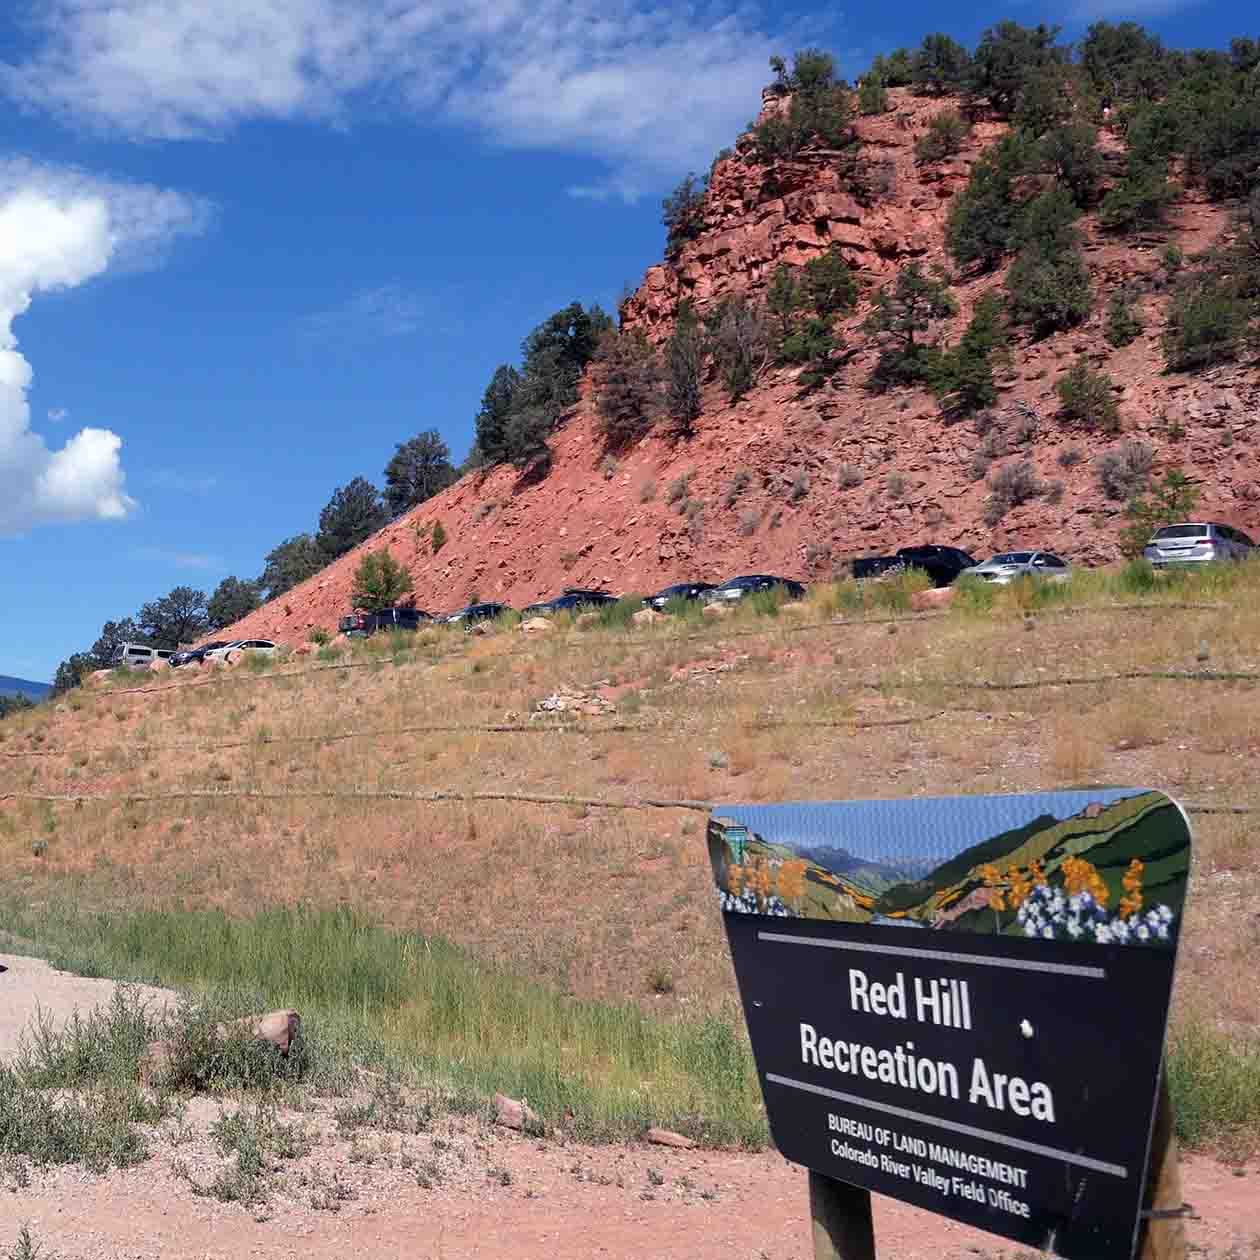 Red Hill Recreation Area